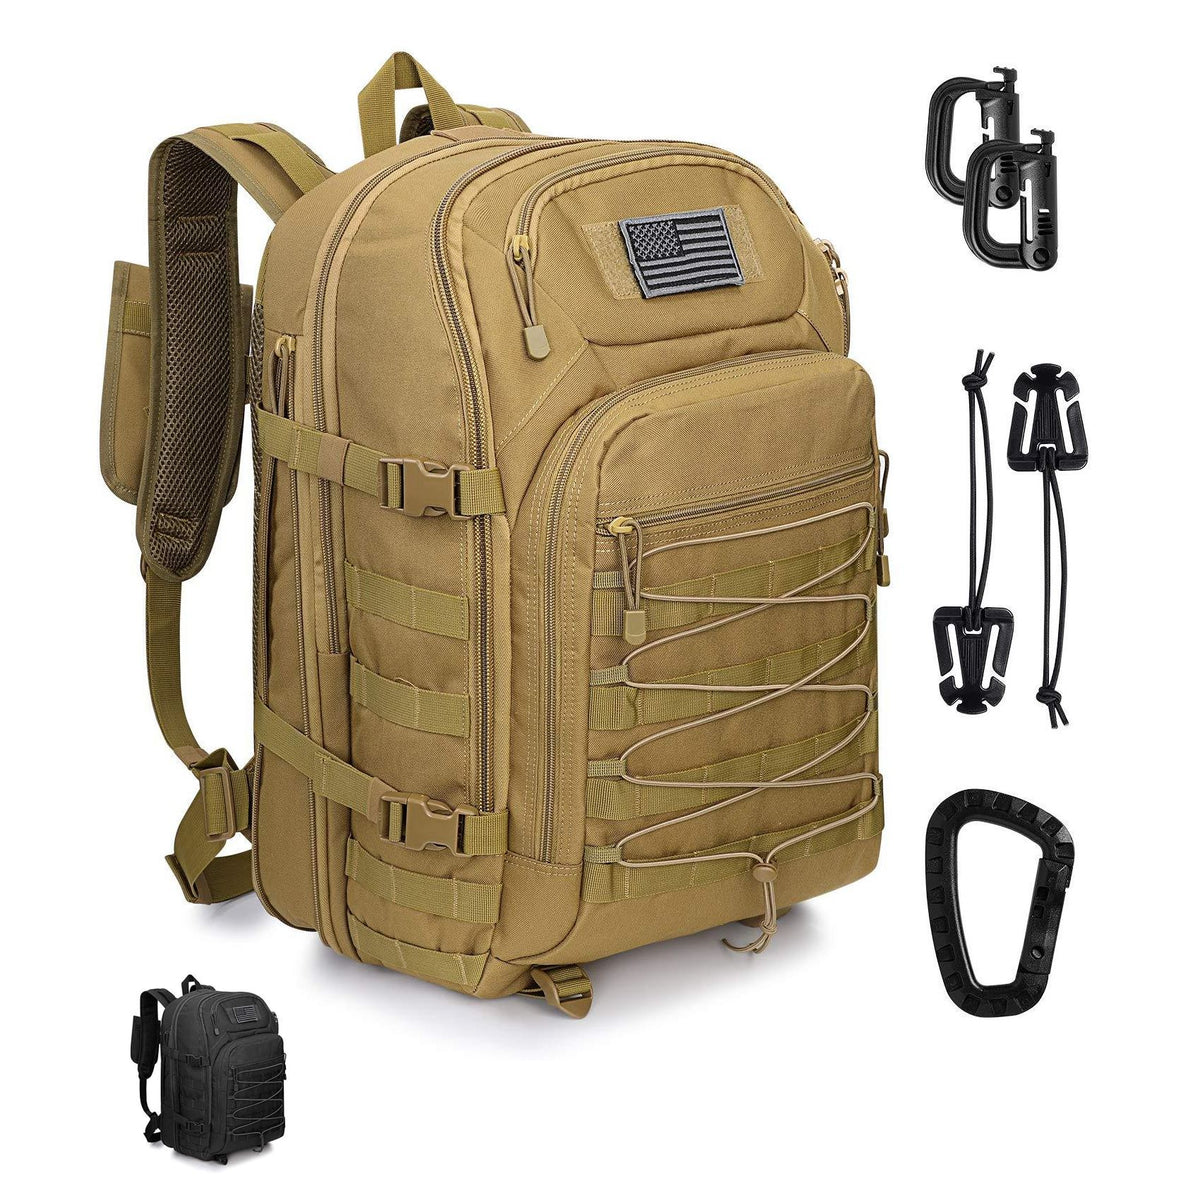 GFX4™ Expandable 45-50L Tactical Outdoor Hiking Bag | 3 Day Bug Out Army MOLLE Backpack tactical bag GFX4™ Tan 